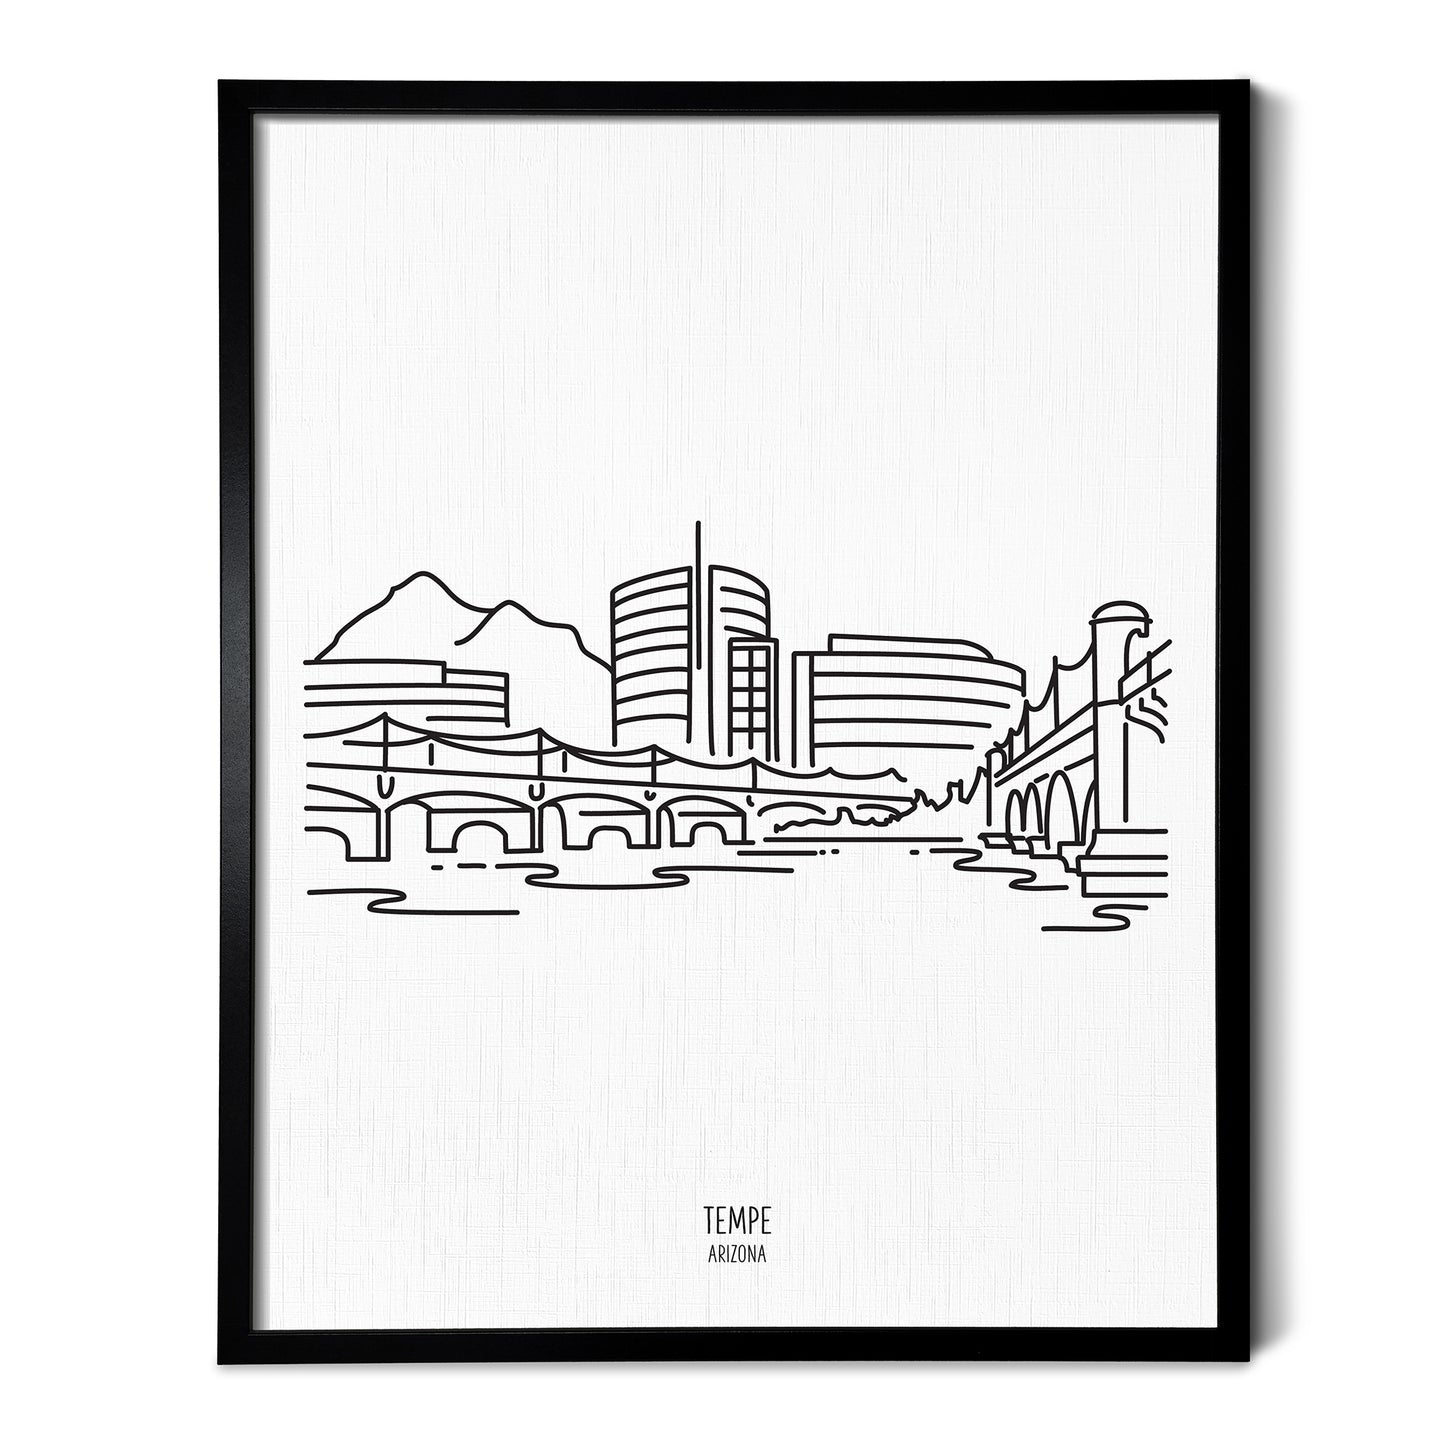 A line art drawing of the Tempe Arizona Skyline on white linen paper in a thin black picture frame